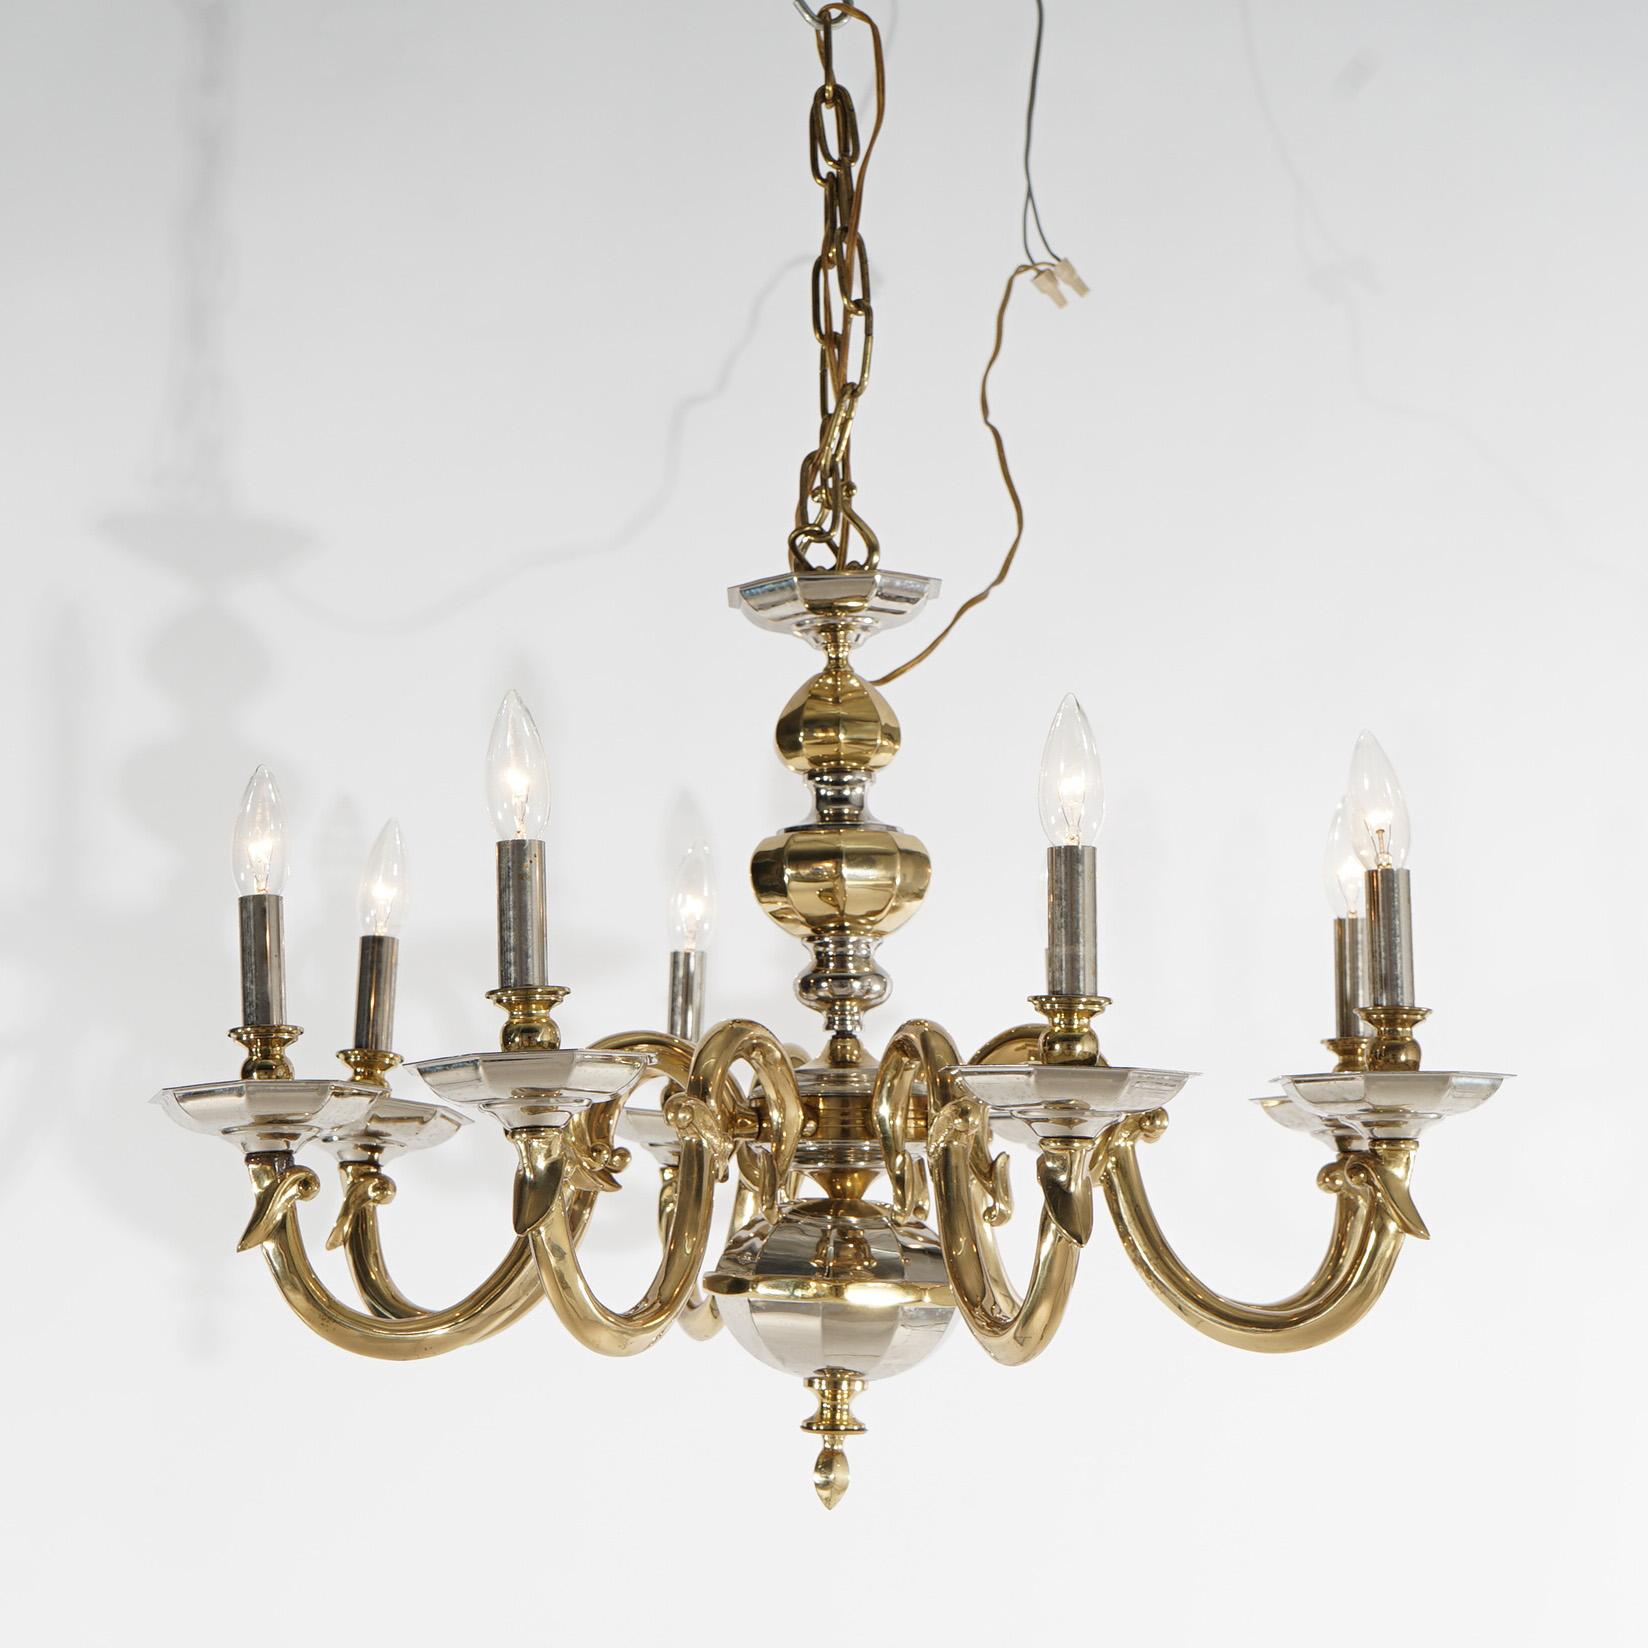 A gilt bronze chandelier offers faceted central font with eight scrolled foliate form arms terminating in candle lights, 20th century

Measures- 21.5''H x 29.5''W x 29.5''D; 20.5'' drop